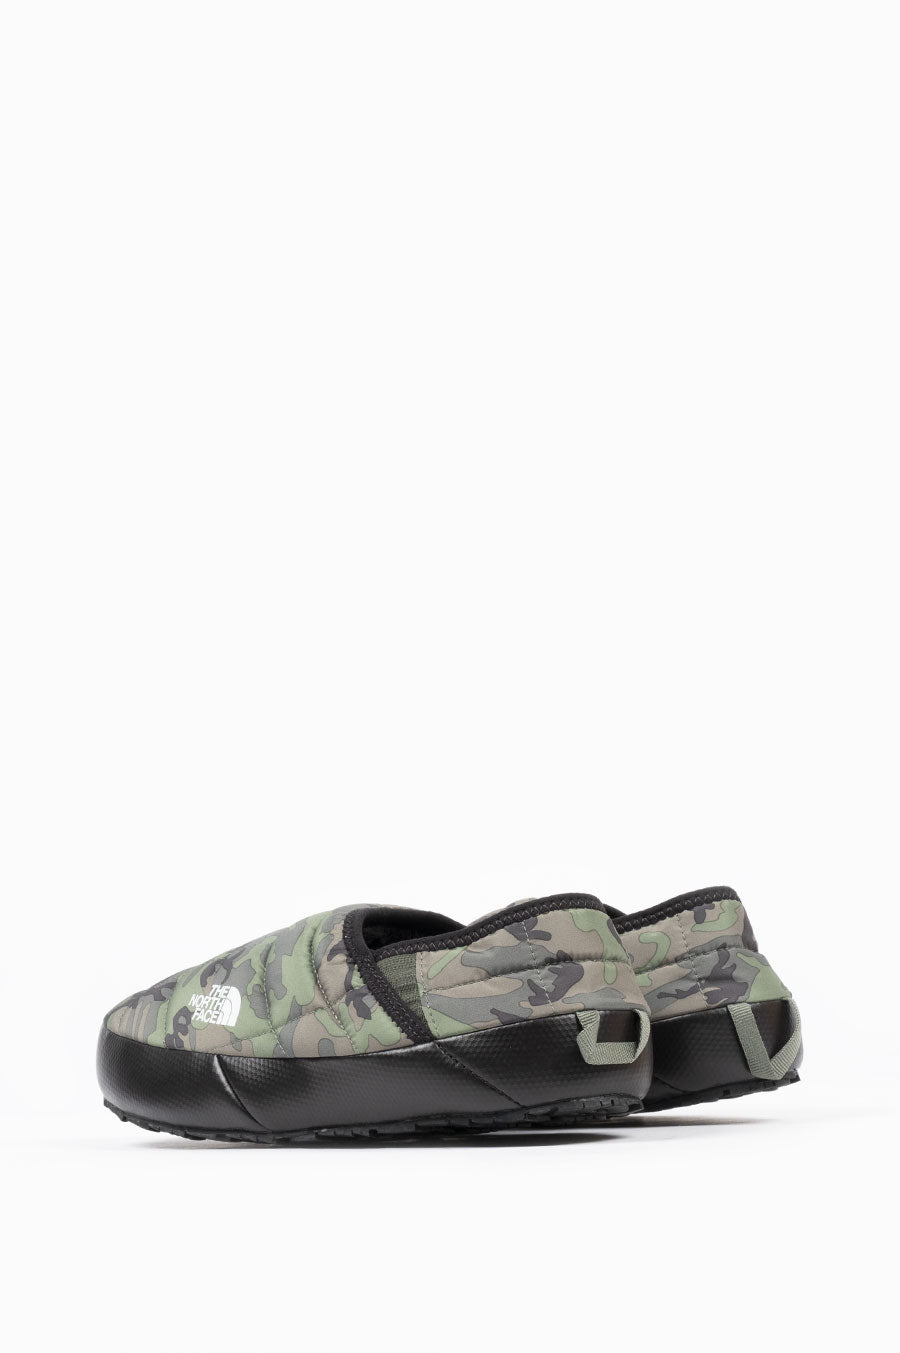 THE NORTH FACE THERMOBALL TRACTION MULE CAMO